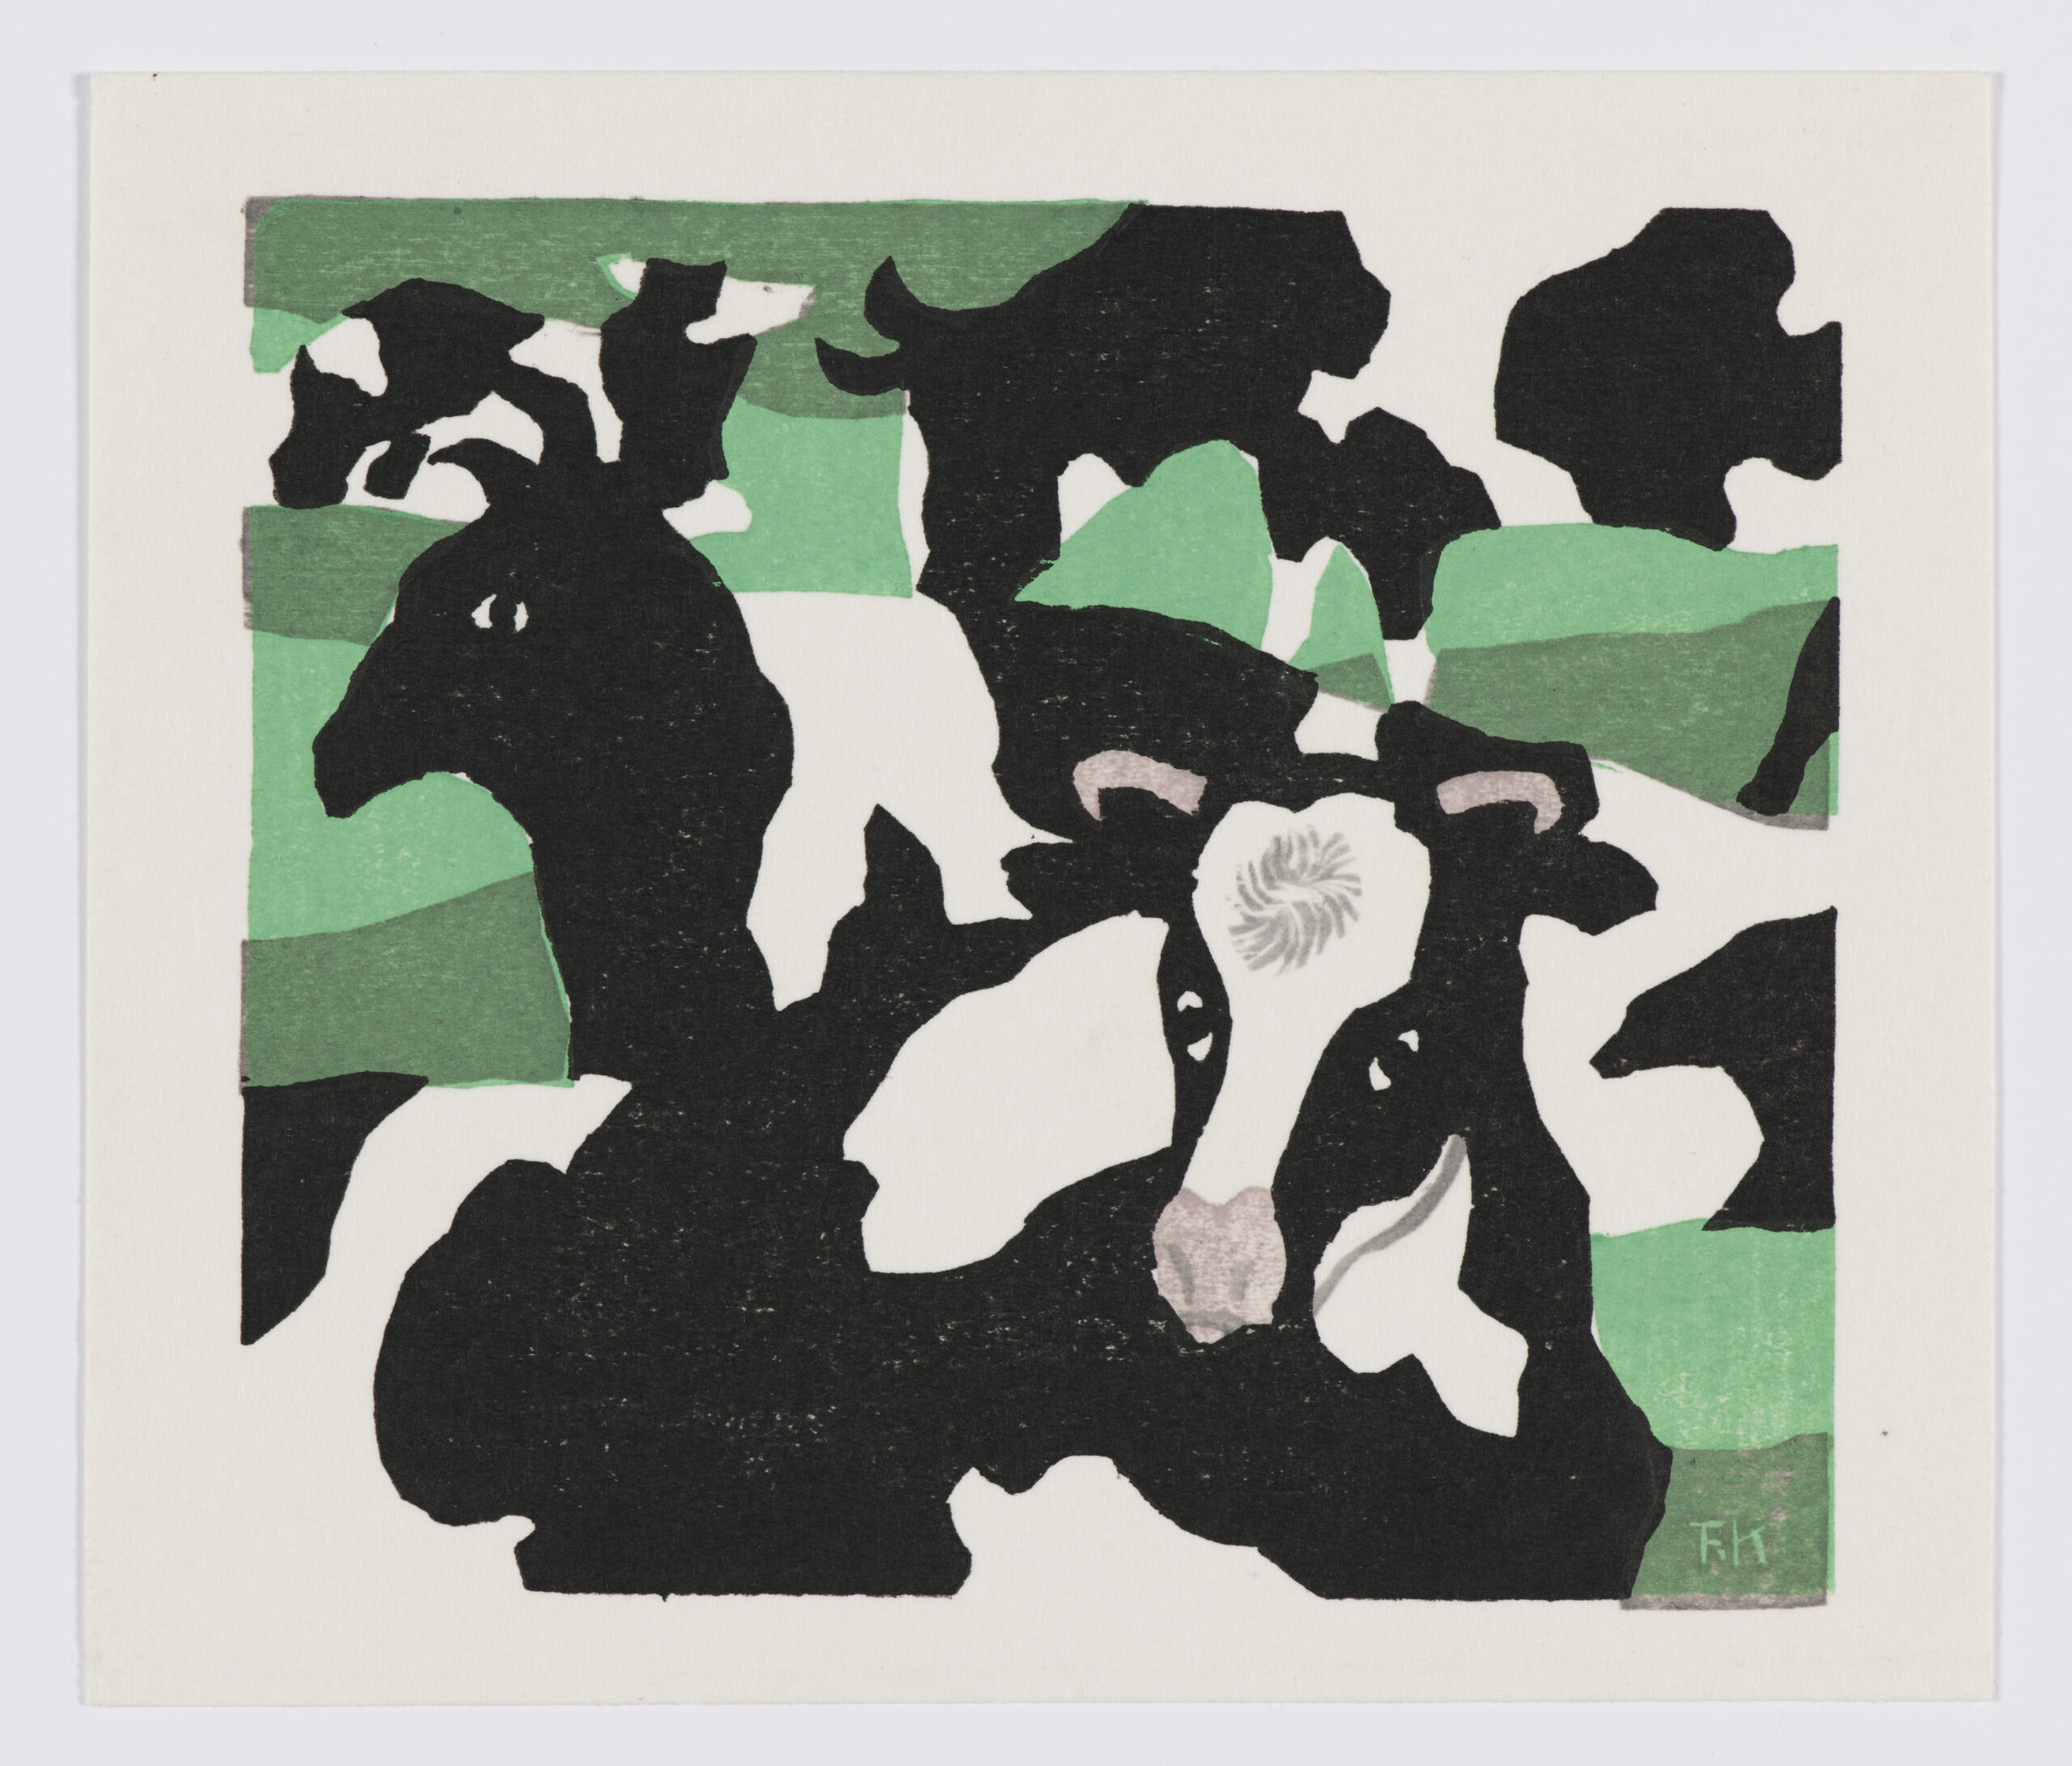 Fumio Kitaoka, Dutch Cow, ca. 1972, color woodcut. Collection of the Kalamazoo Institute of Arts; Gift of Charles L. Stroh, 2014.21